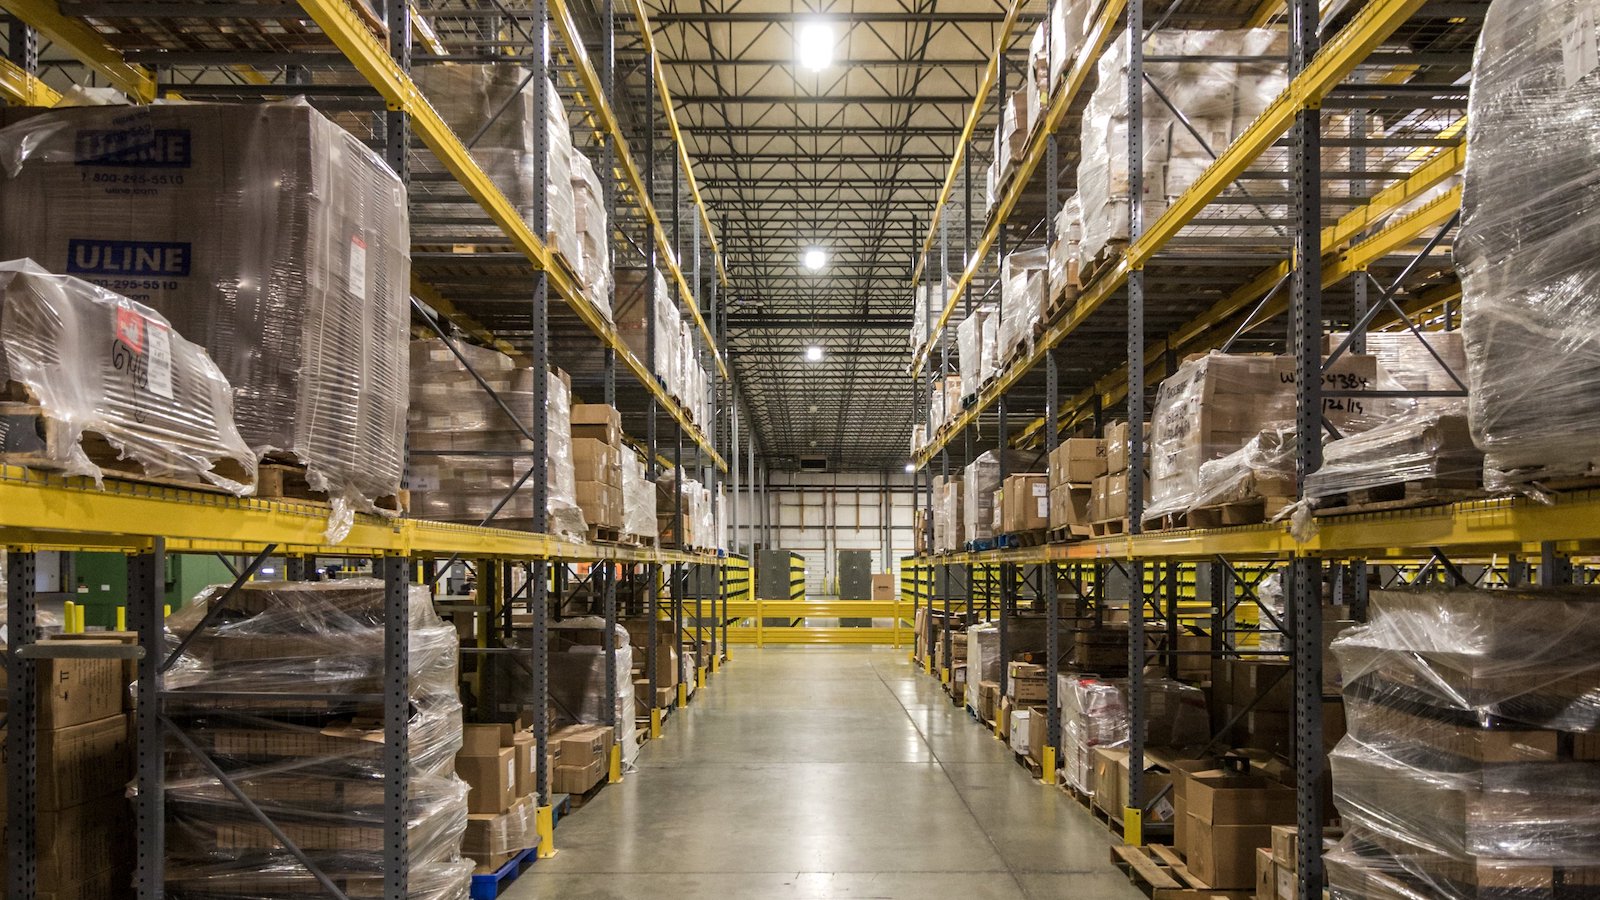 Things to Consider When Choosing a Warehouse Location